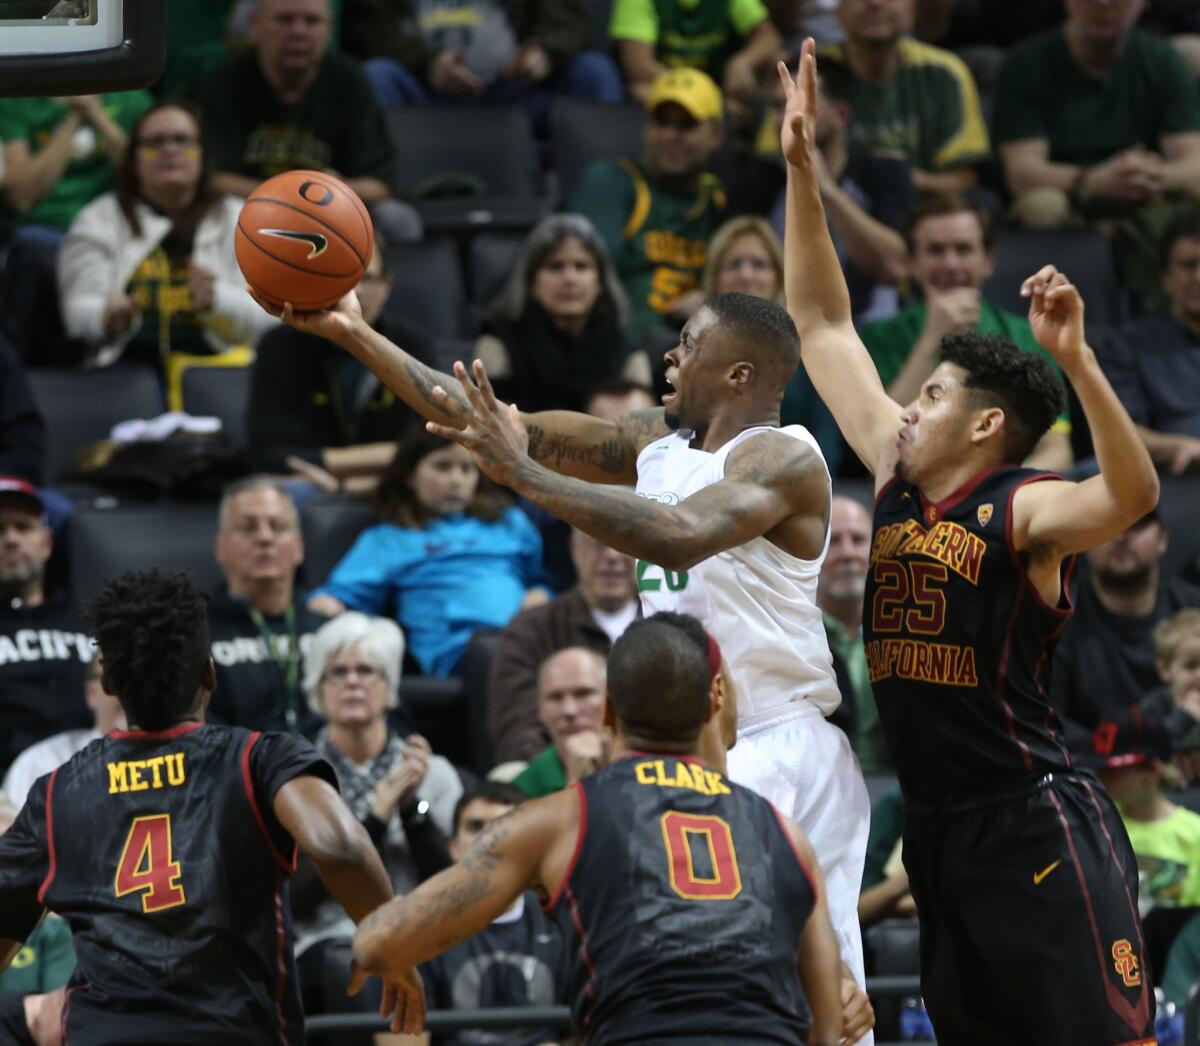 Oregon's Elgin Cook, top center, goes up for two points under pressure from USC's Chimezie Metu (4), Darion Clark (0) and Bennie Boatwright, right, during the second half of a game on Jan. 21.